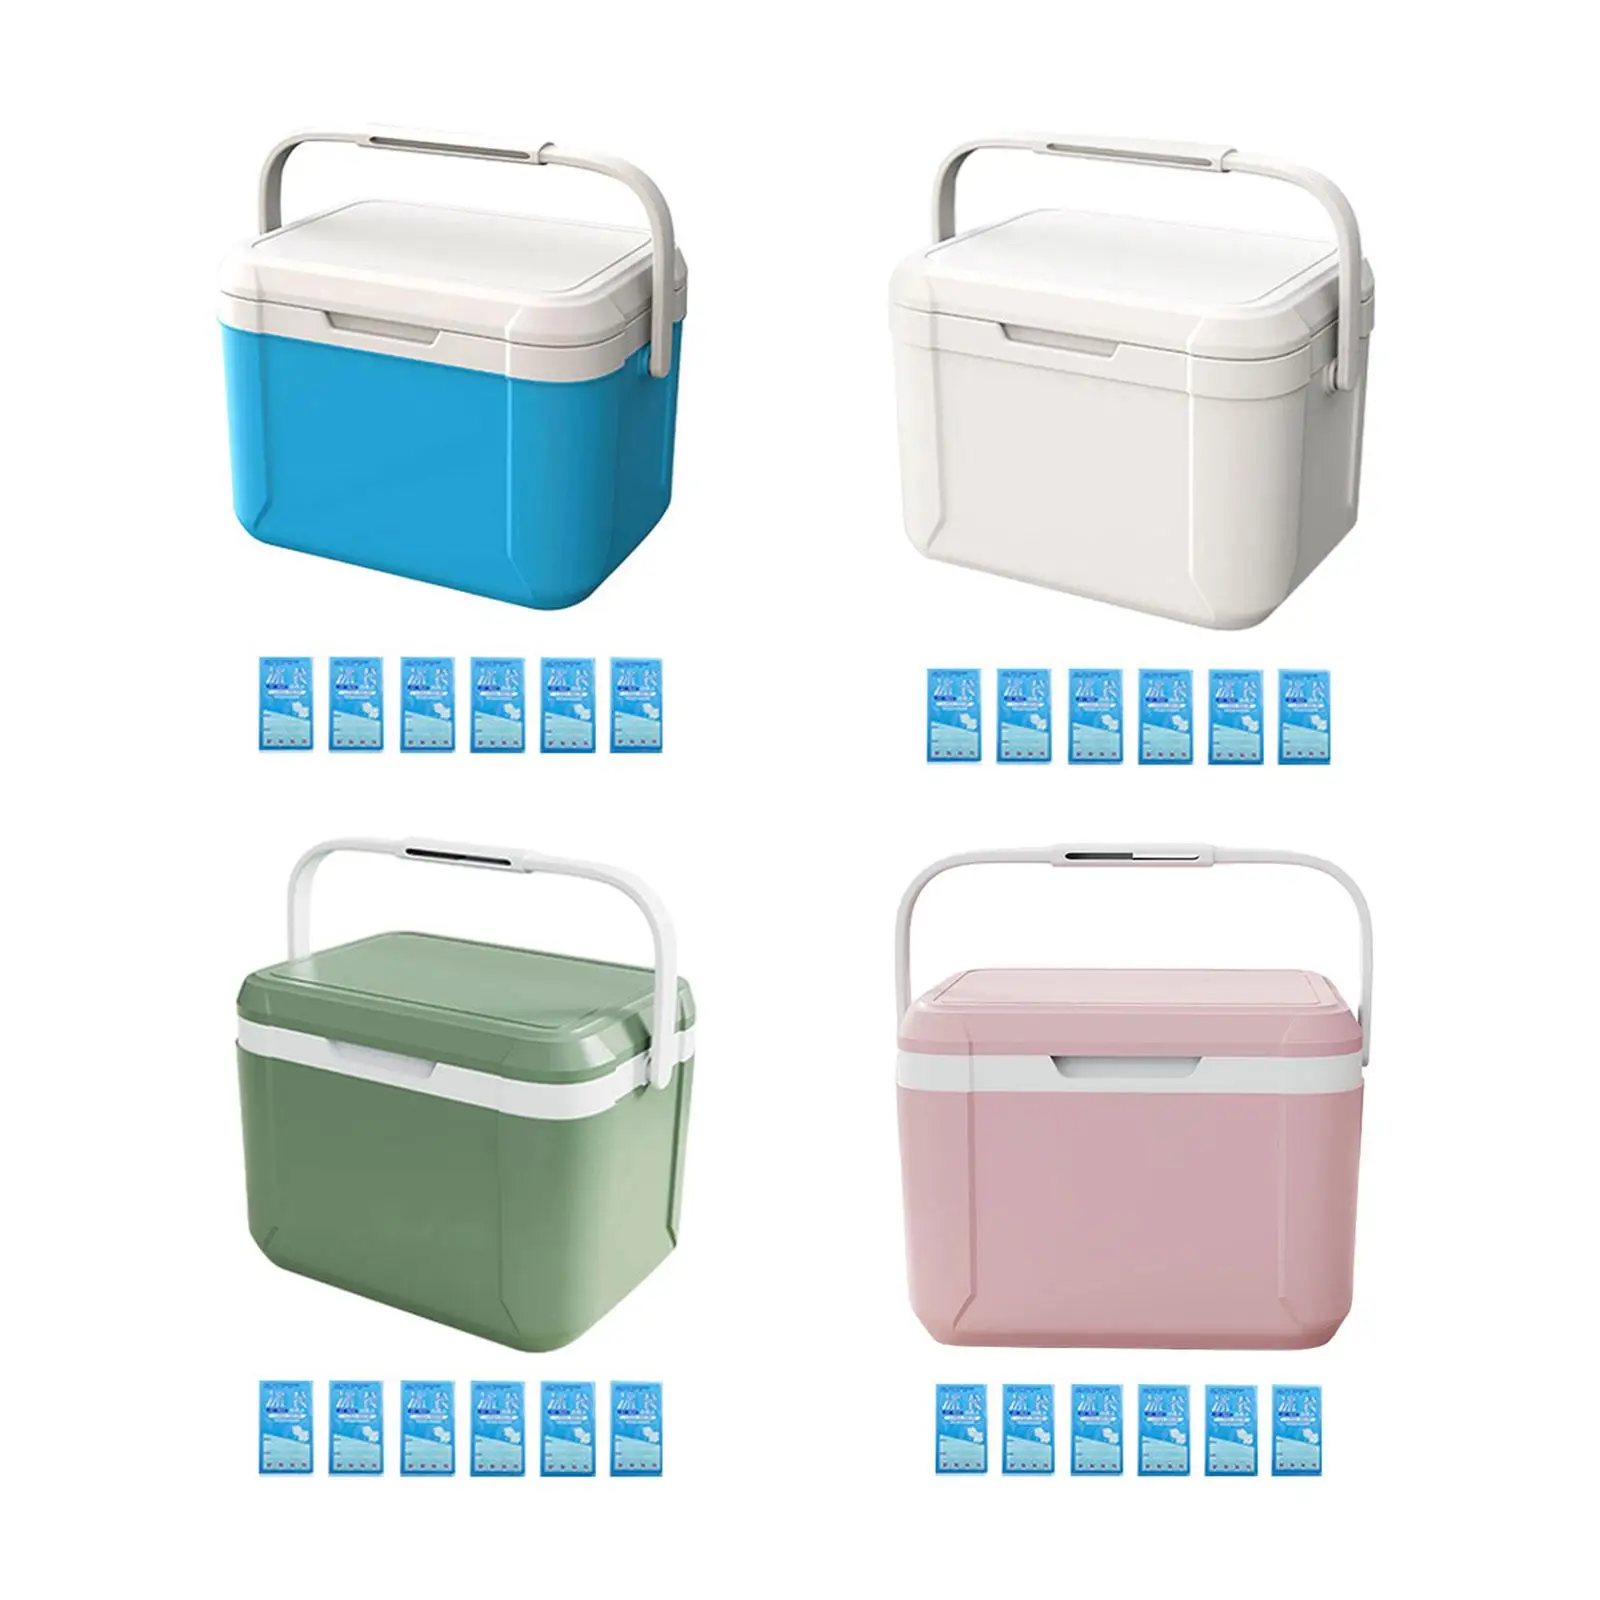 Insulated Cooler Box Car Refrigerator Household Portable Ice Bucket Ice Retention Cooler Hard Cooler for Barbecue Beach Party